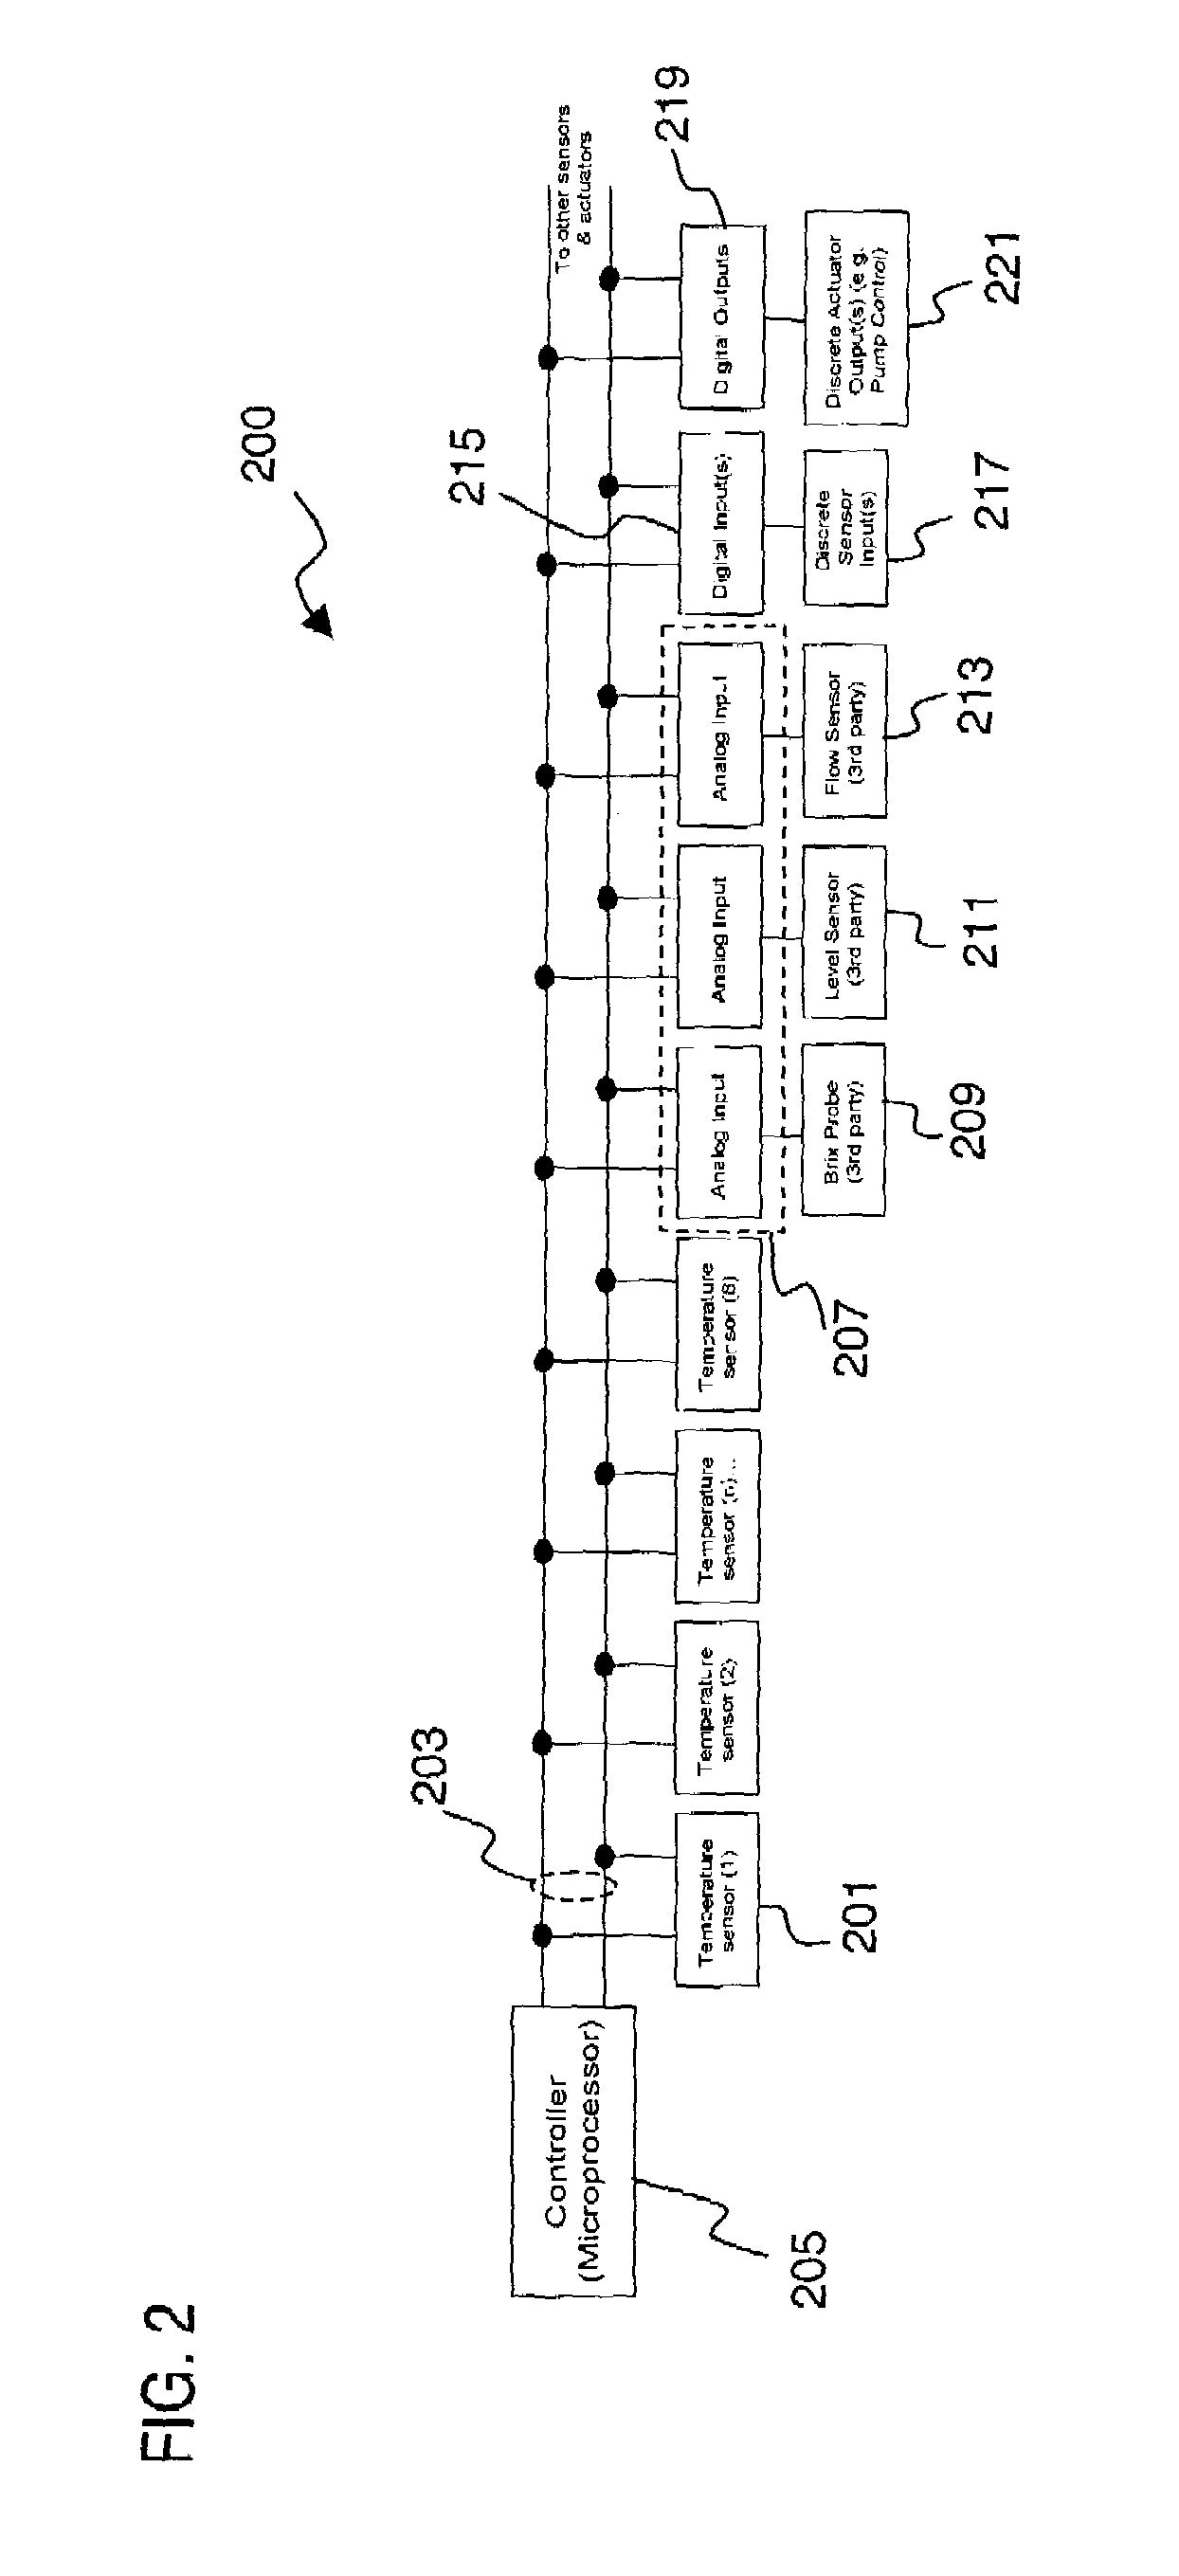 System and method for temperature sensing and monitoring